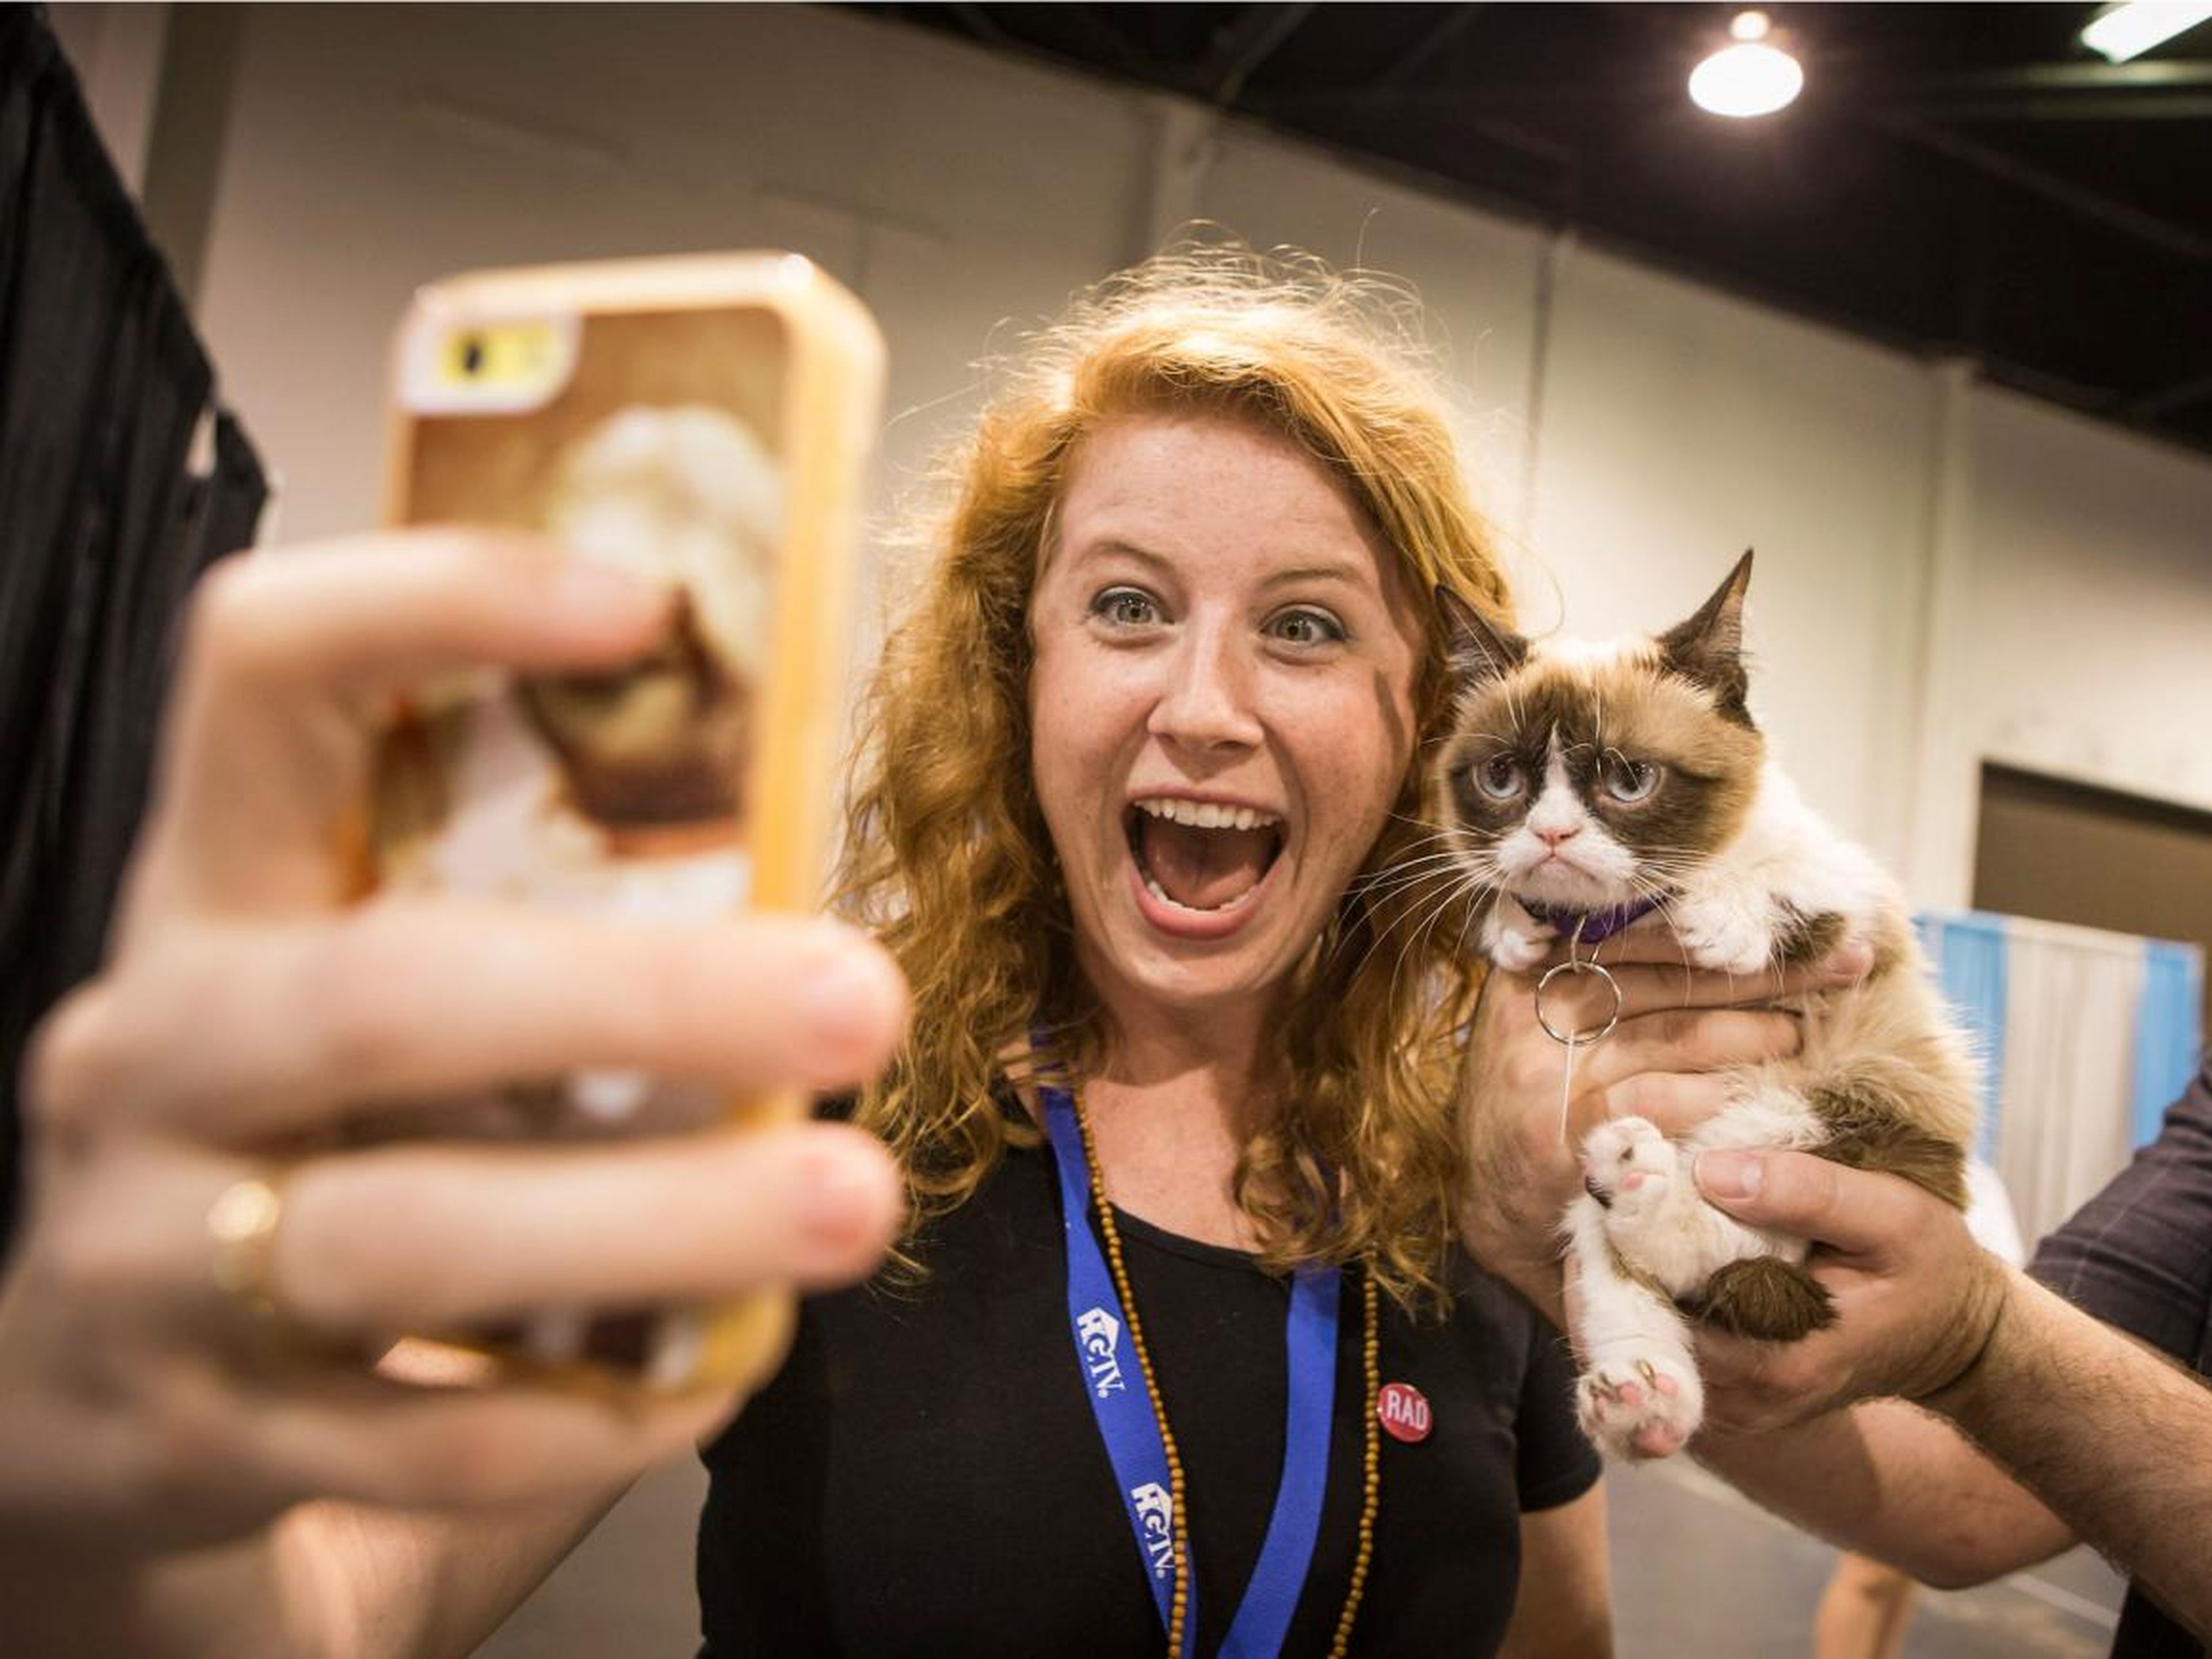 Snapchat just introduced new selfie filters meant specifically for your cat